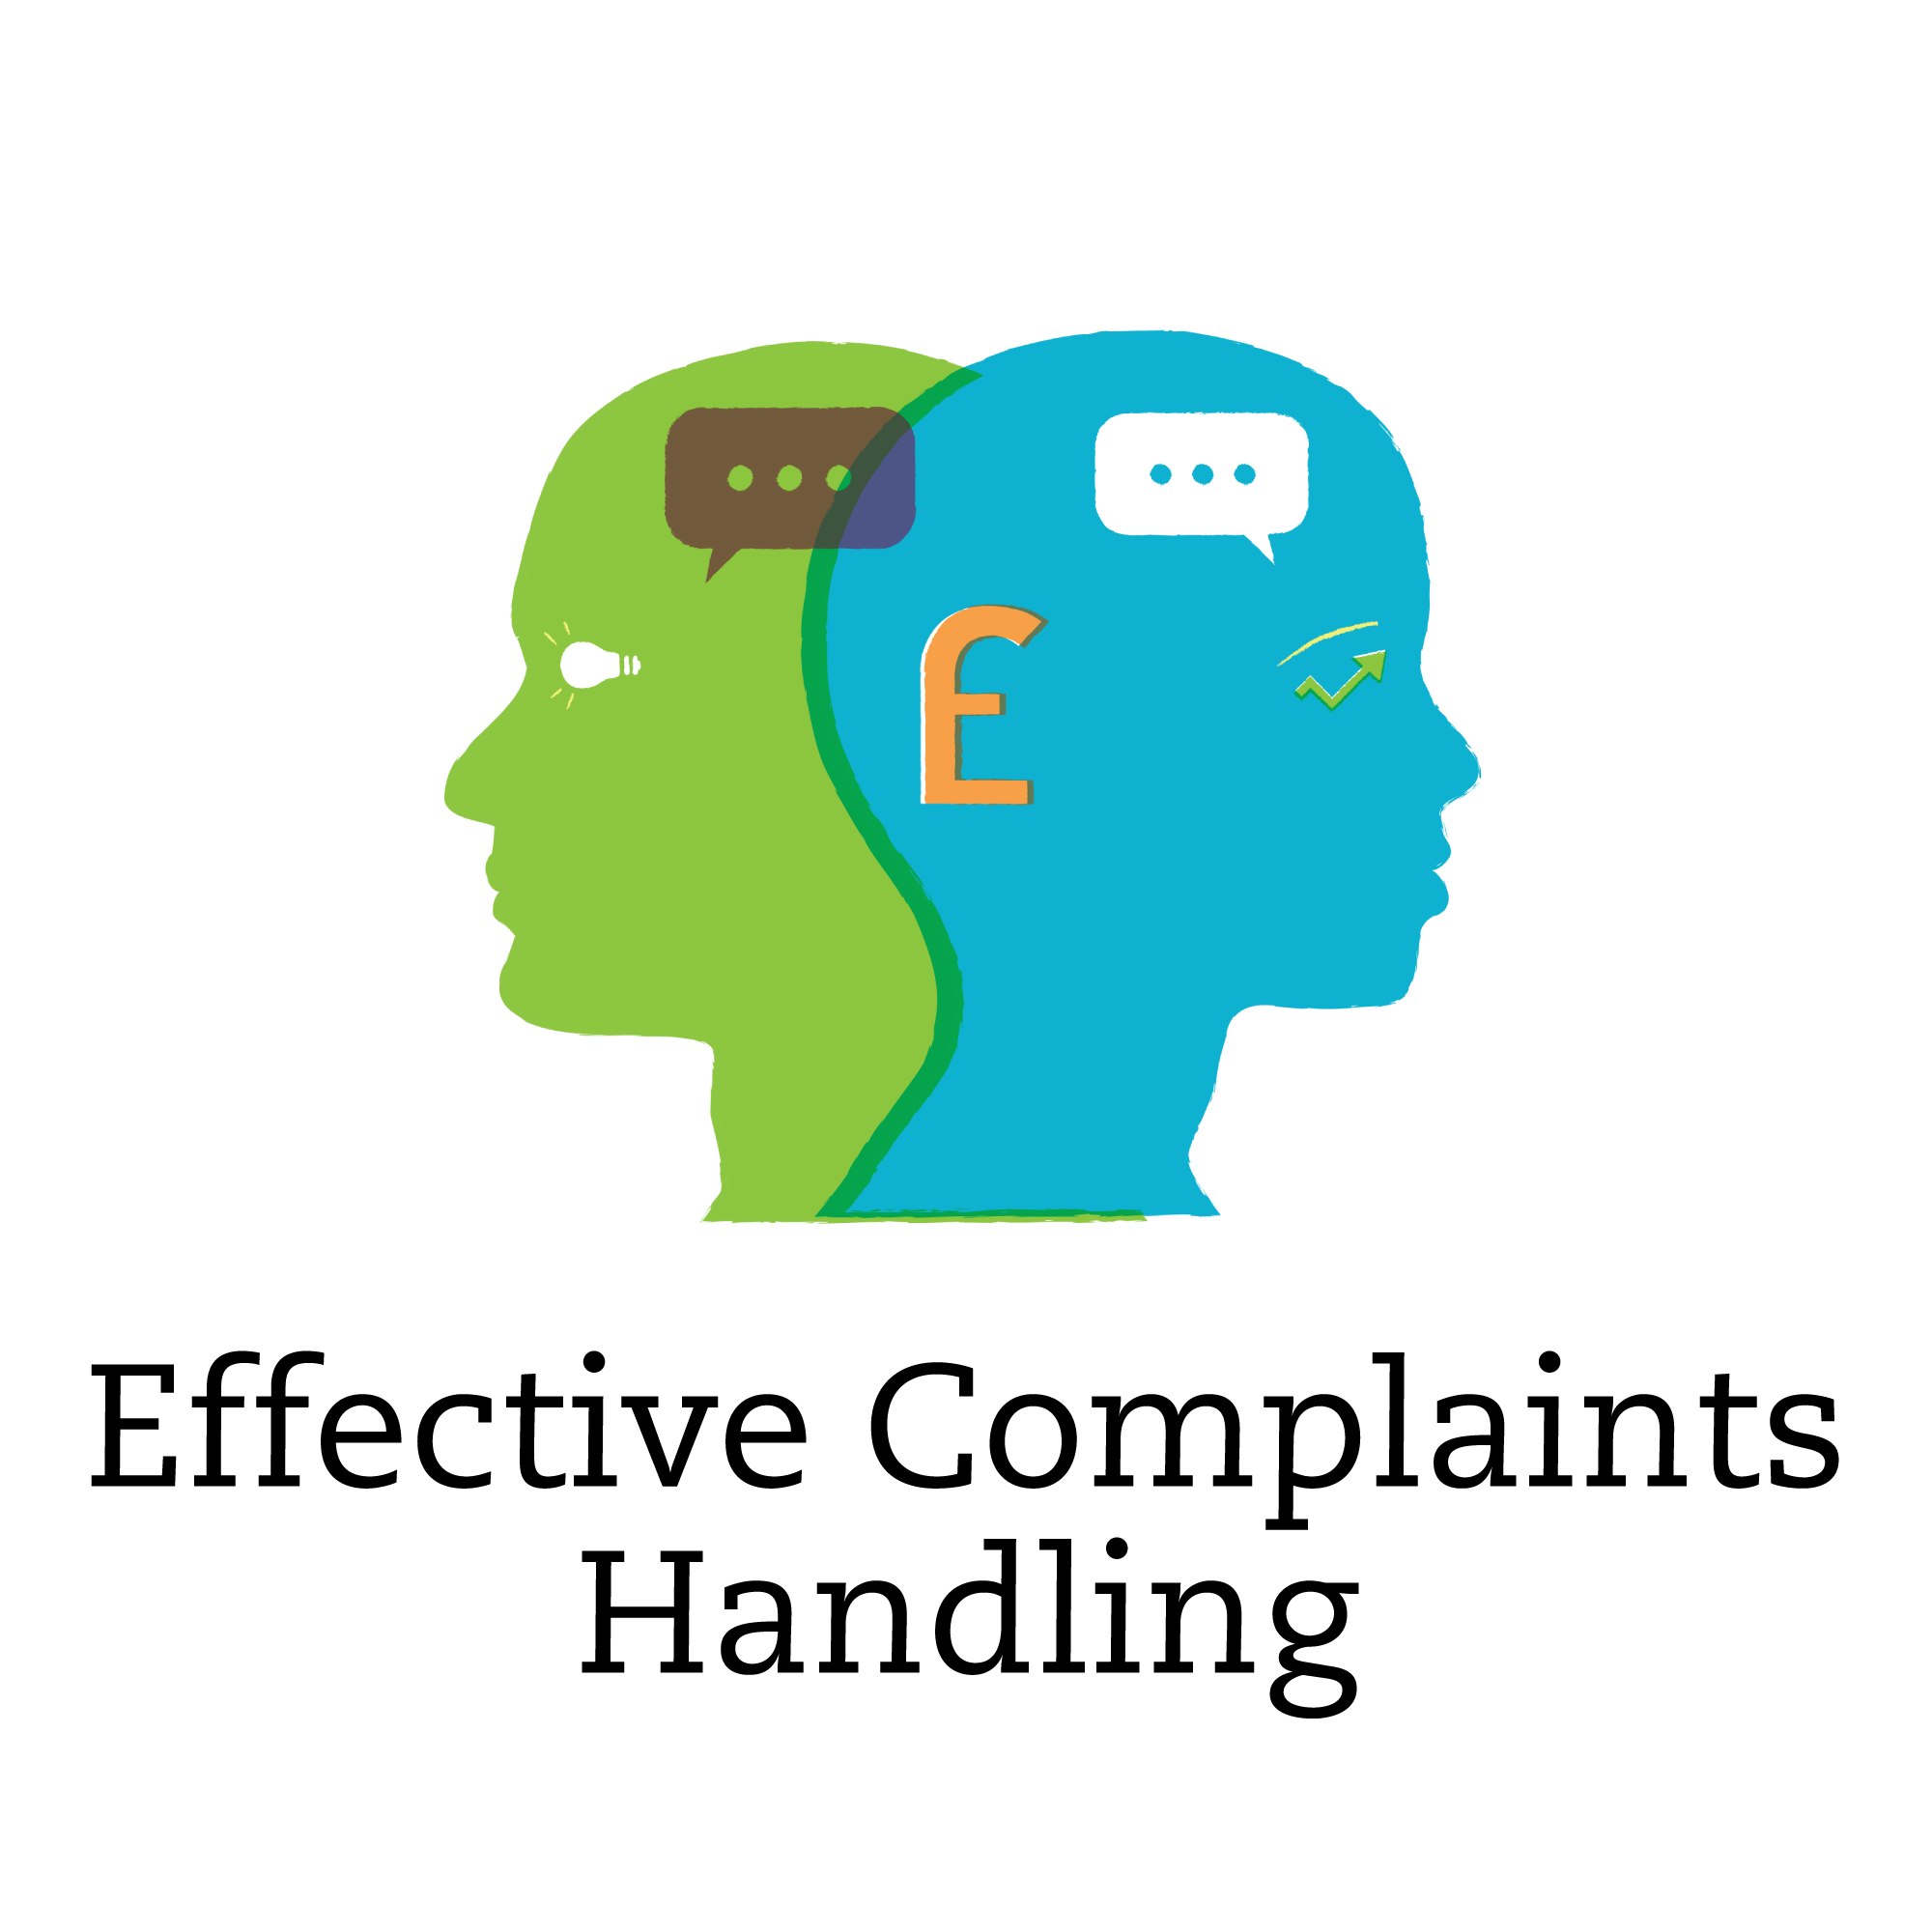 Effective complaints handling – turning complaints into customer insight (17 Feb)